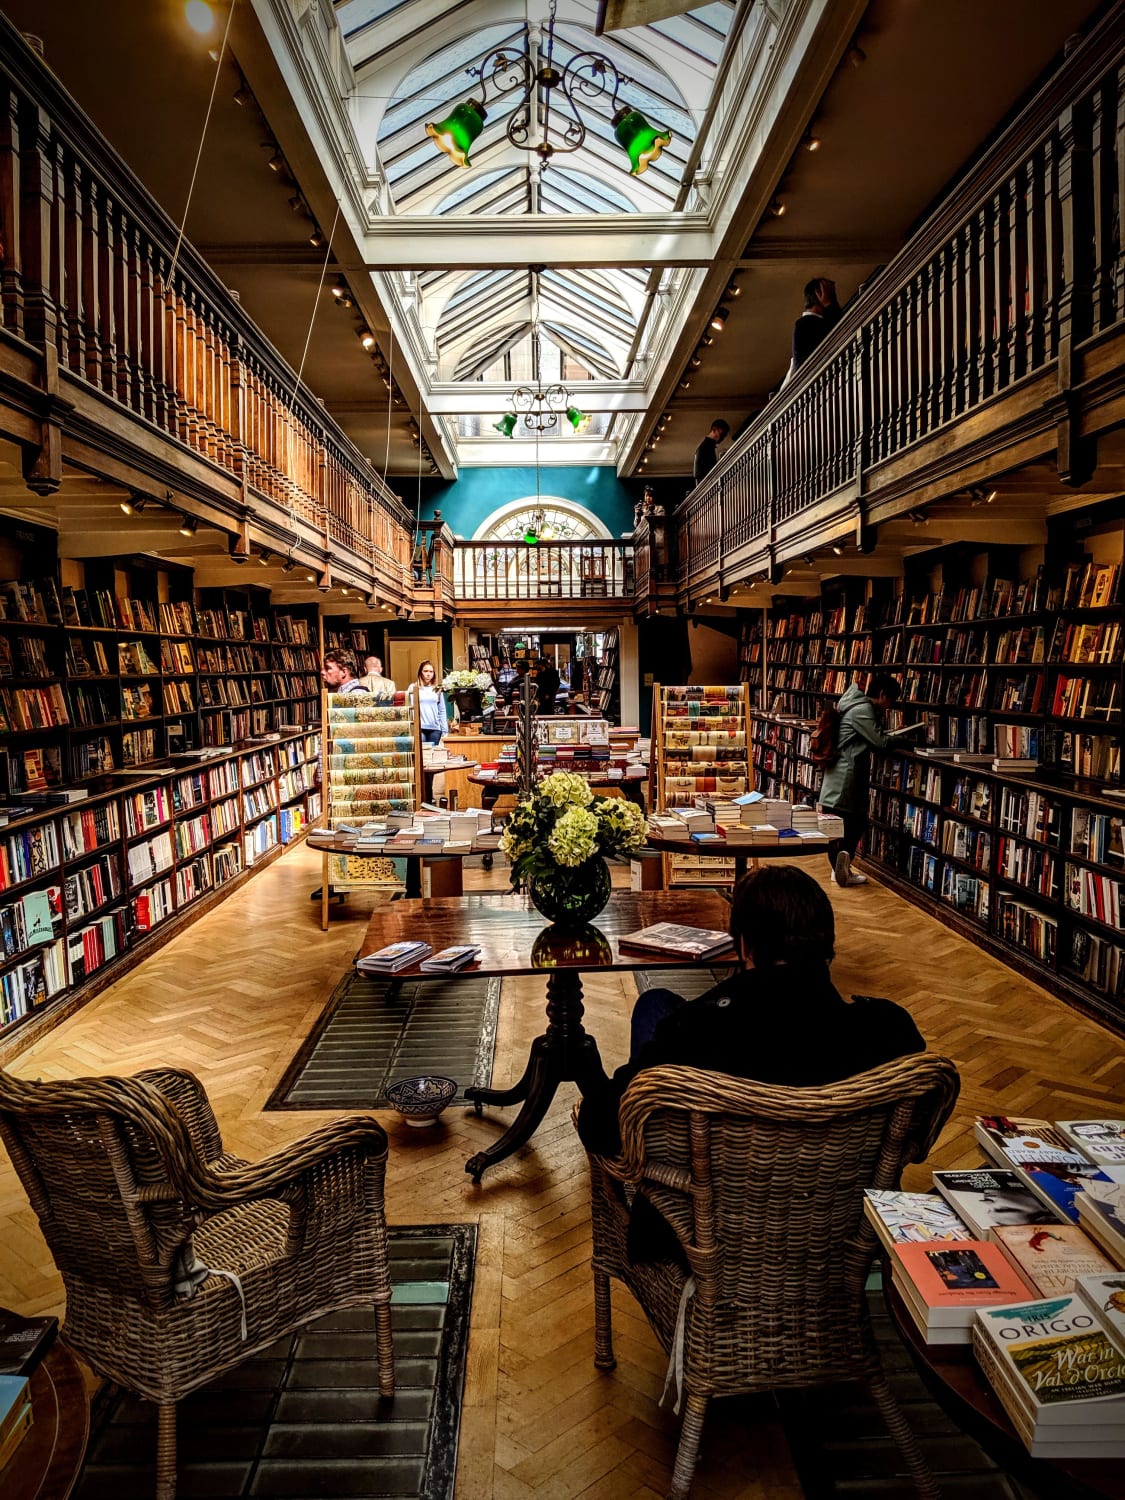 Daunt Books in London. Definitely one of the highlights of my trip last summer!